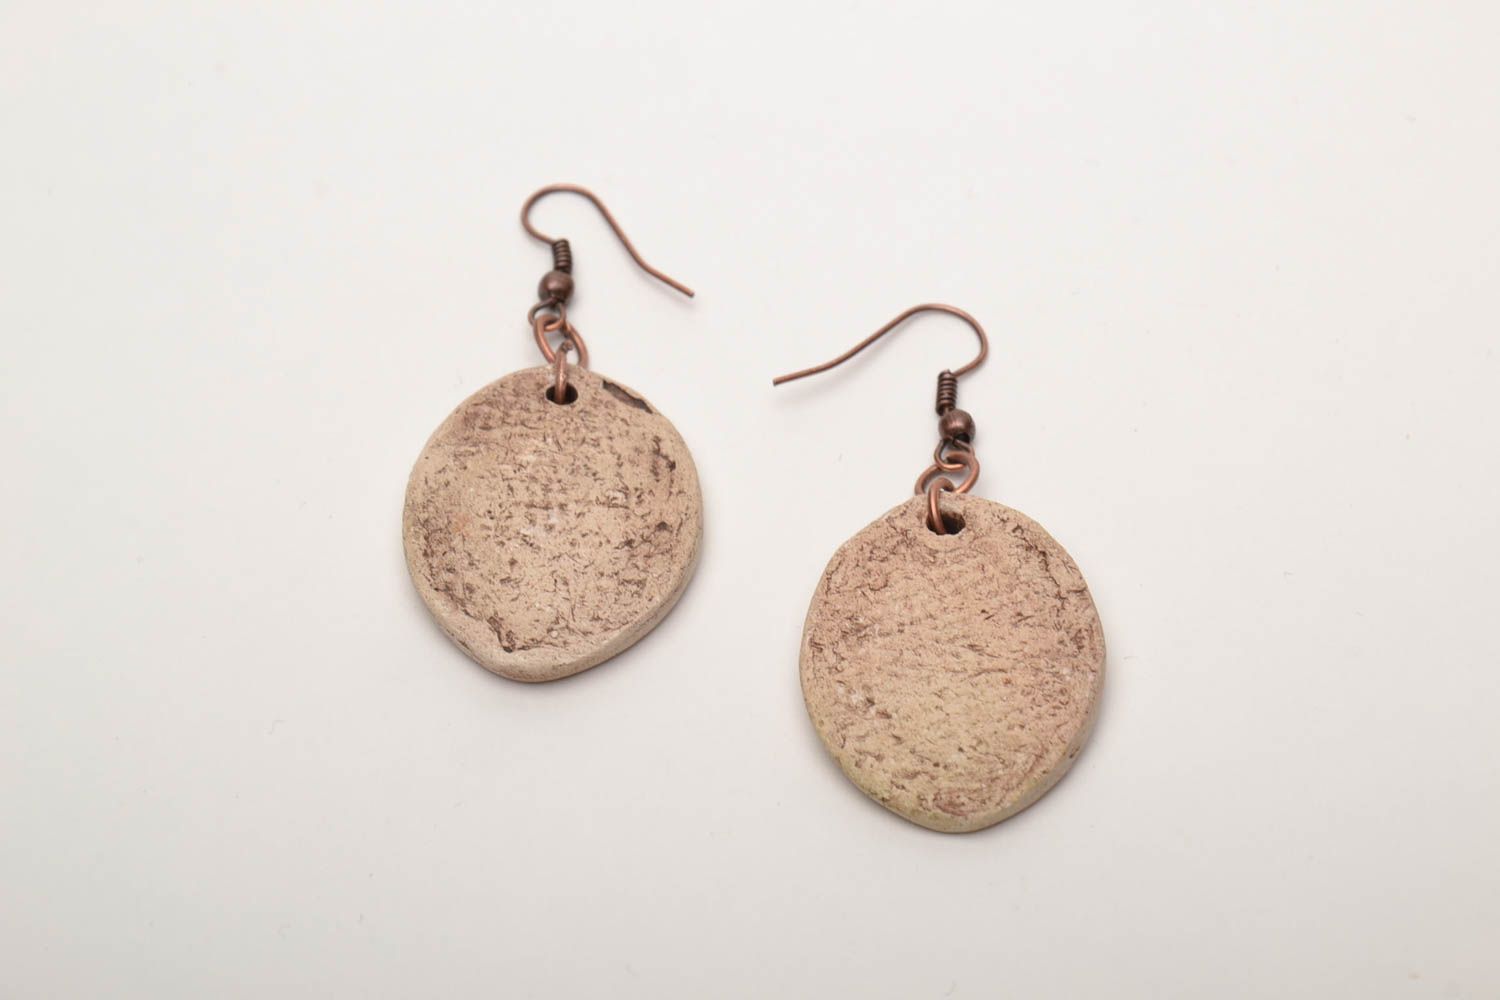 Clay earrings with pattern in ethnic style photo 5